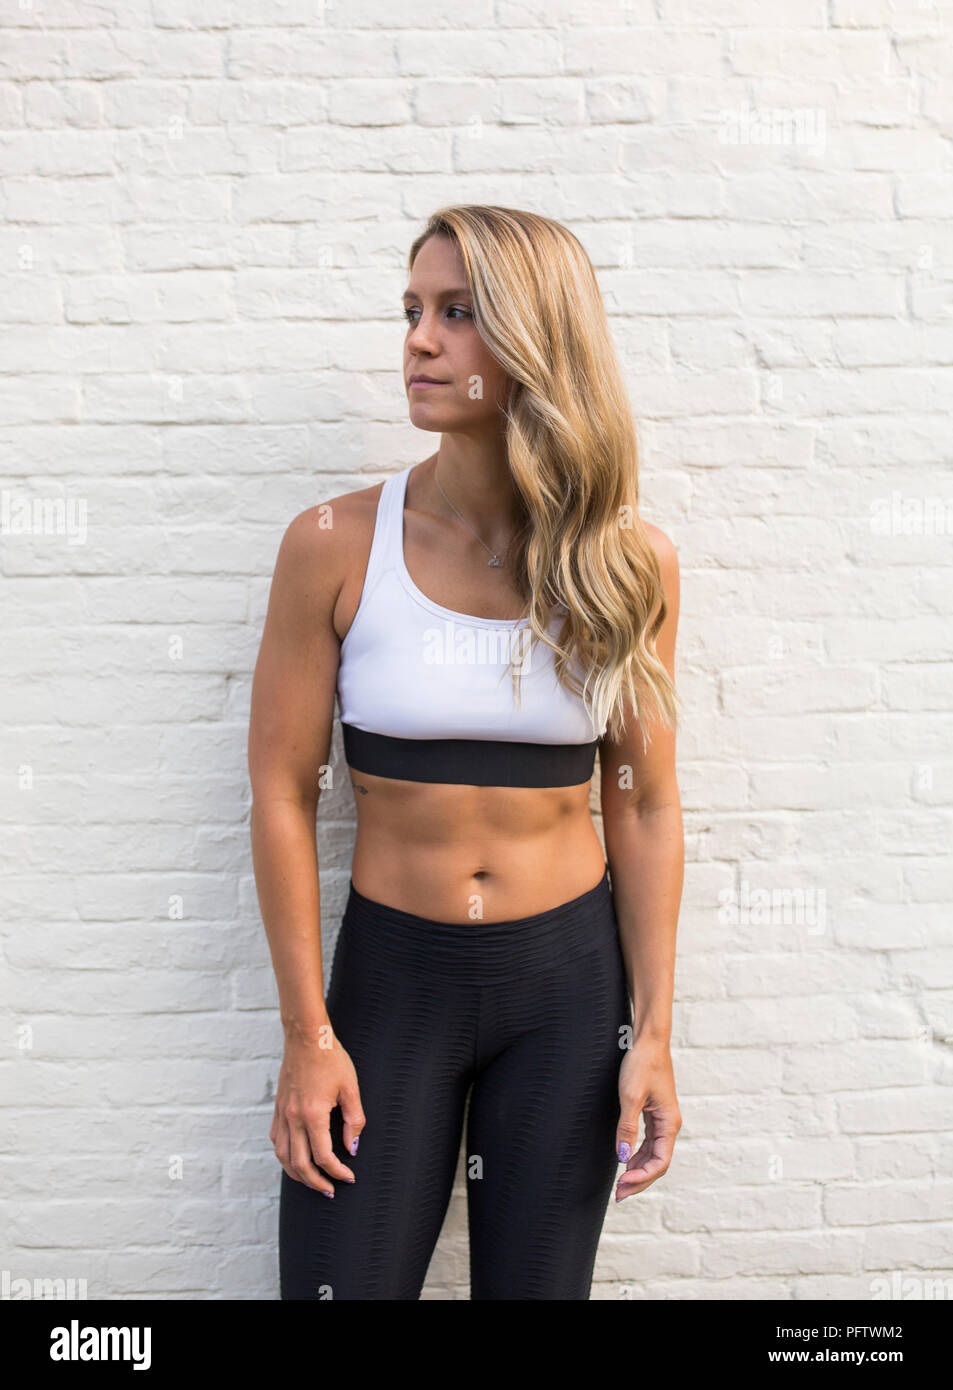 Young Adult Woman in Fitness Attire against White Brick Wall Looking Away Stock Photo